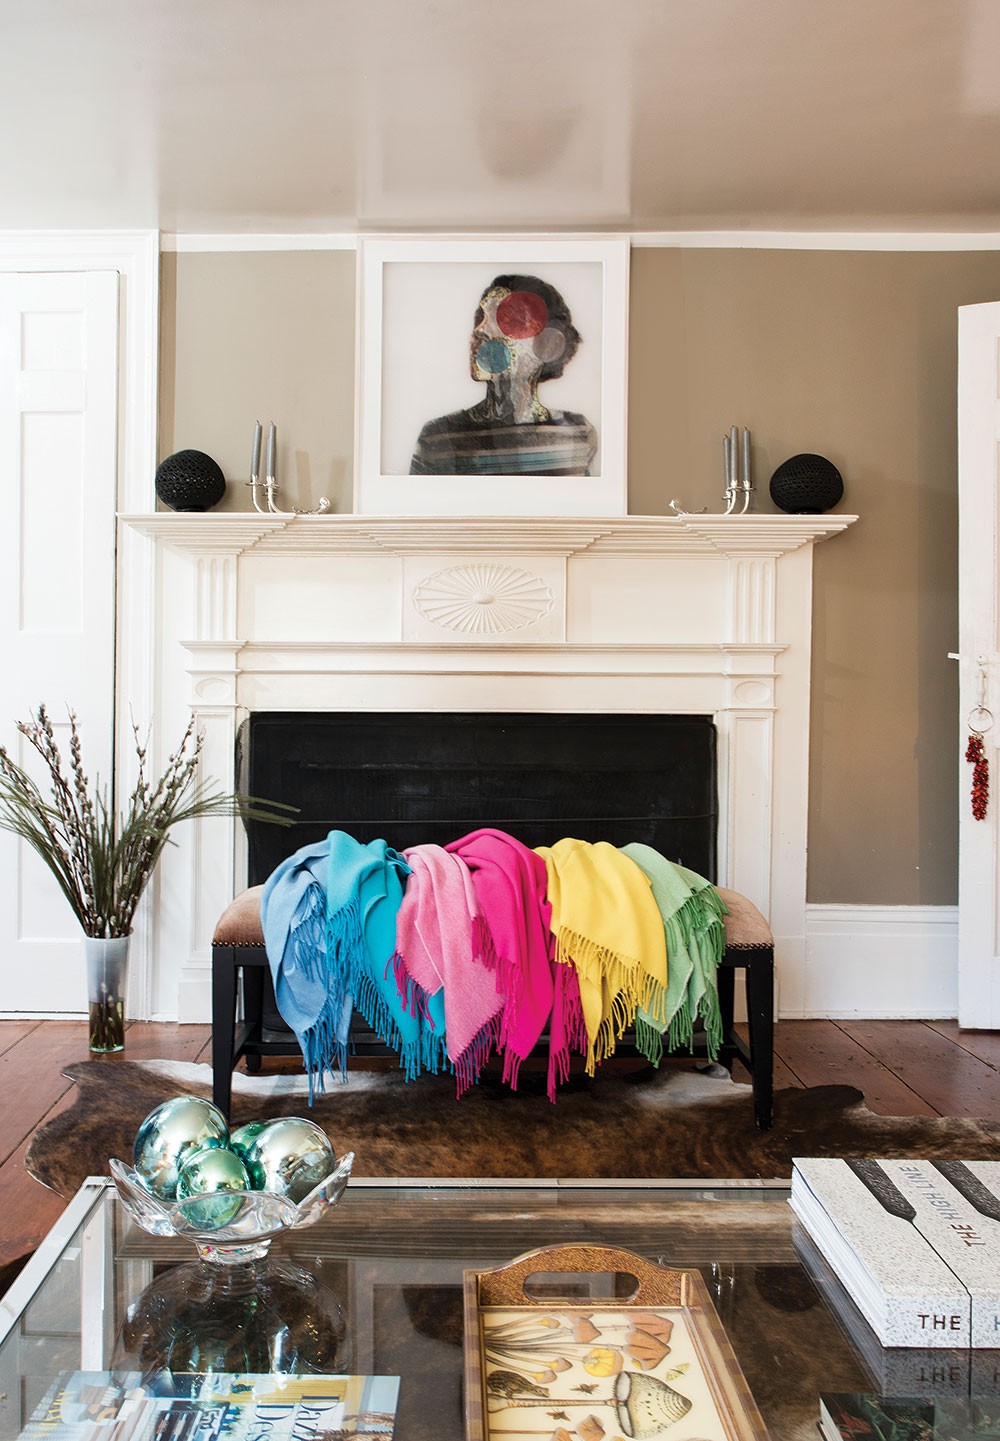 The living room fireplace with a rainbow of shawls. Alpaca fur naturally ranges in 22 different shades. After separating out the guard hair and spinning the fur into yarn, Adams dyes it then weaves it into her signature warm, ultra-soft knit. - DEBORAH DEGRAFFENREID